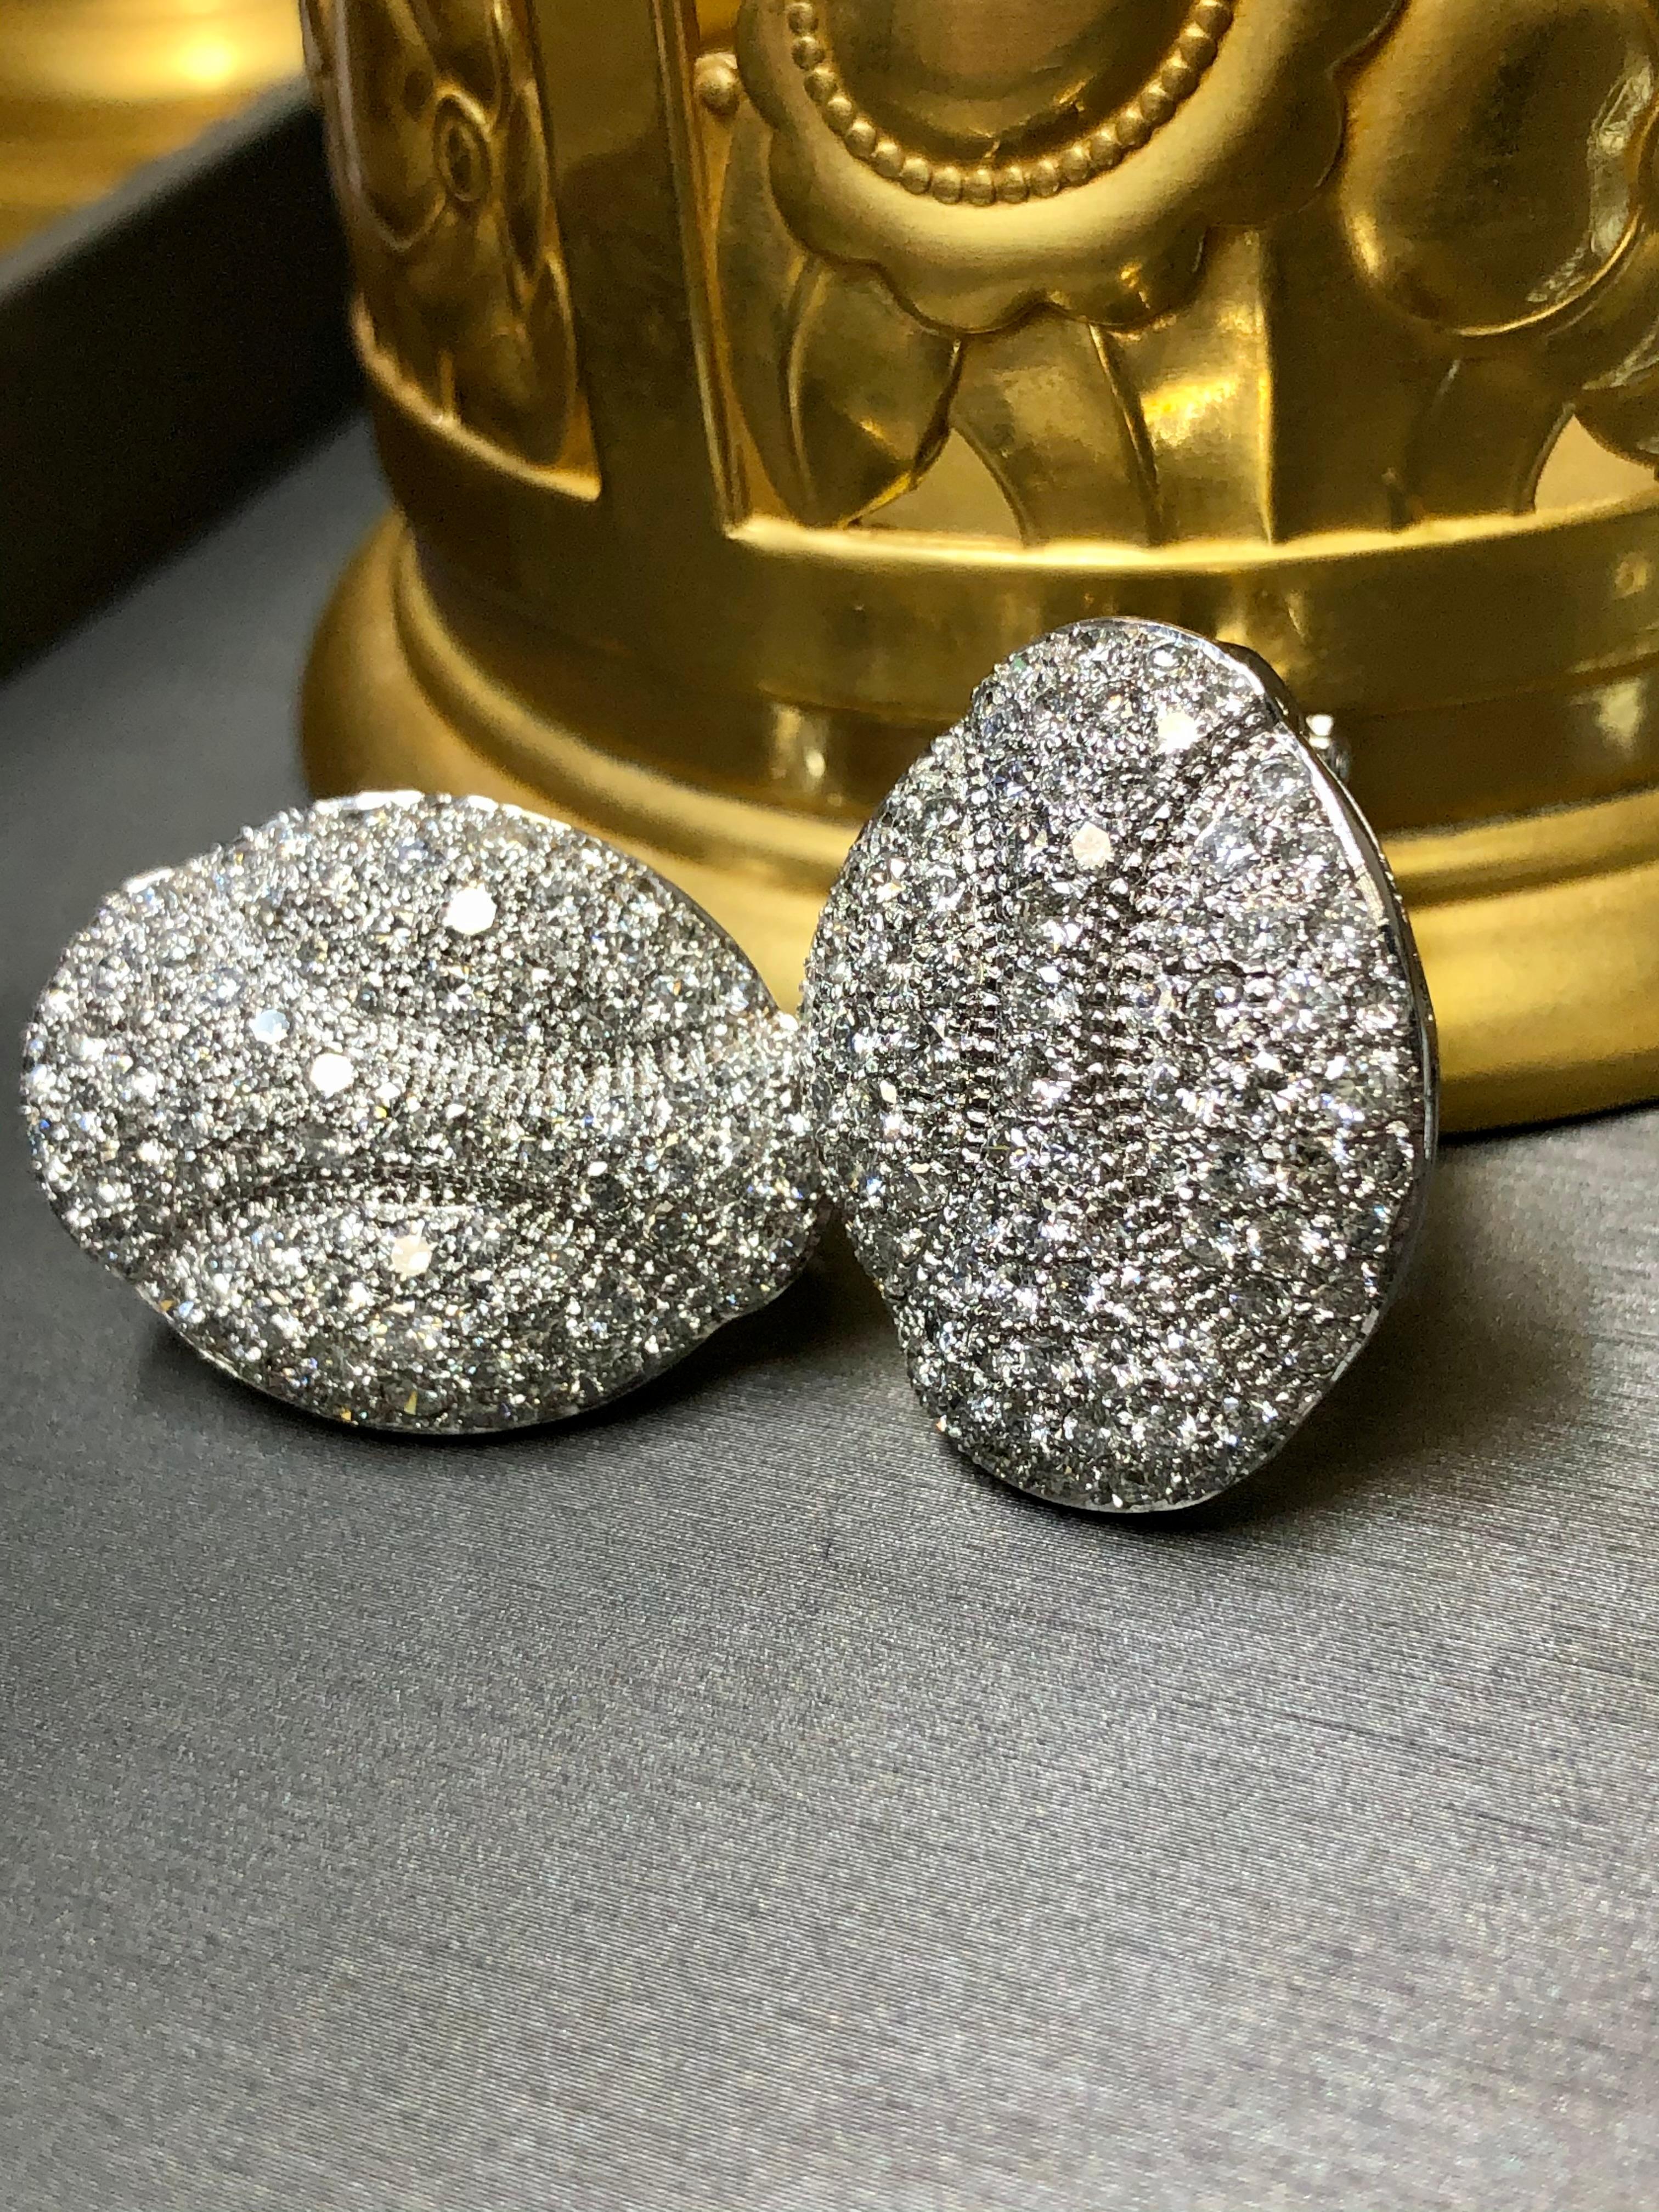 Estate Platinum Pave Diamond Huggies Omega Back Earrings G Vs+ 5.50cttw In Good Condition For Sale In Winter Springs, FL